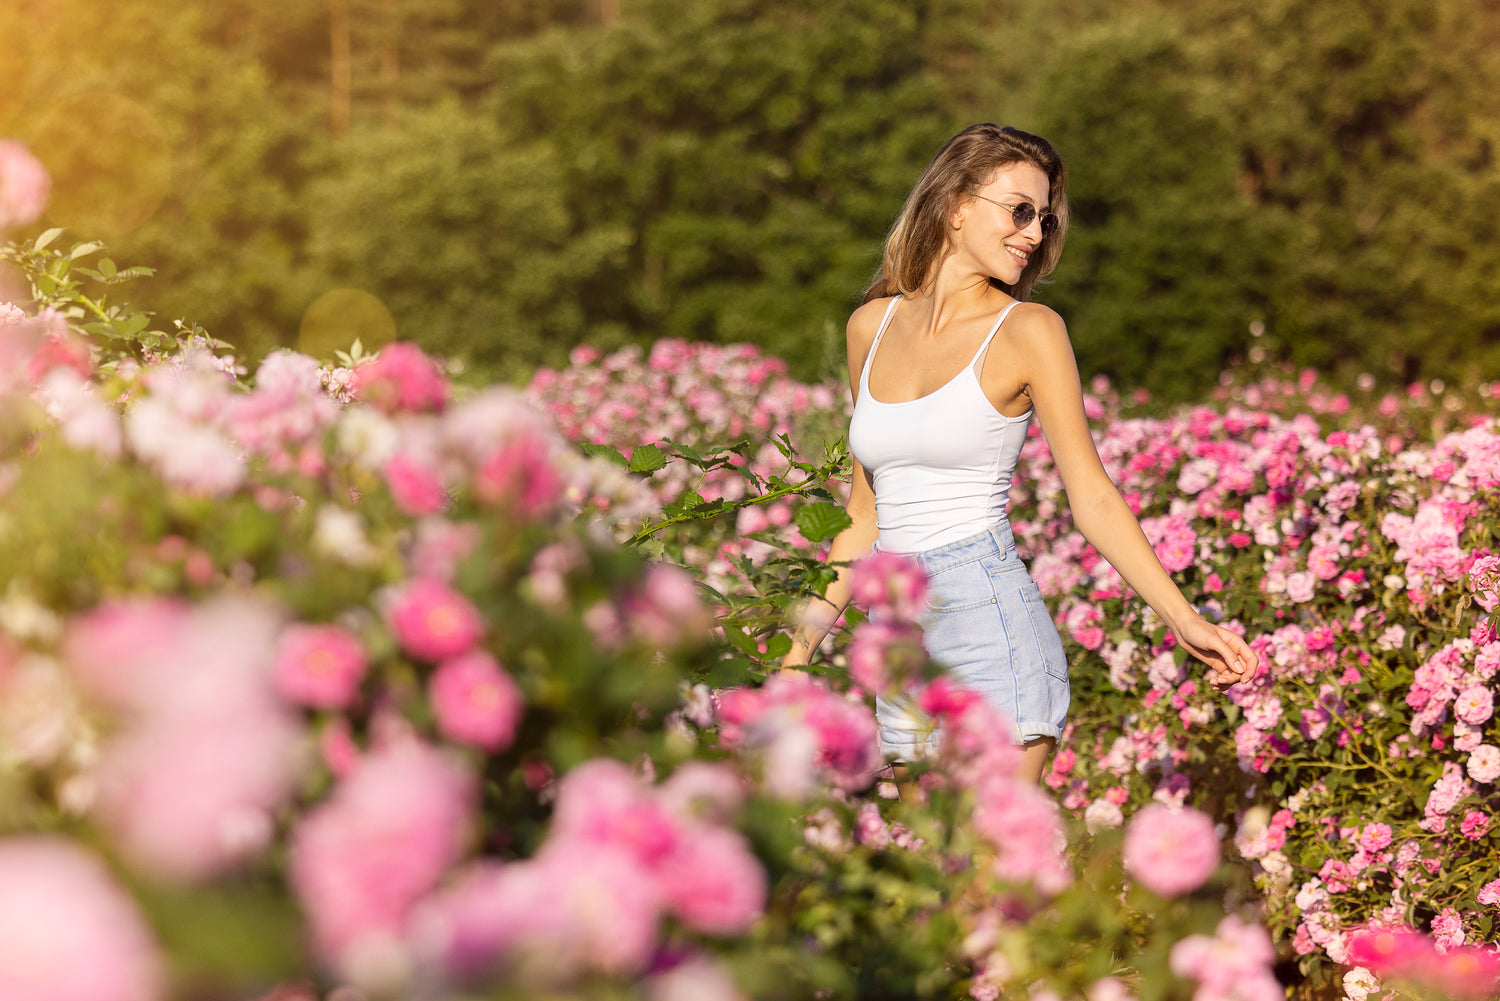 A young woman is strolling through a field of Bulgarian roses.